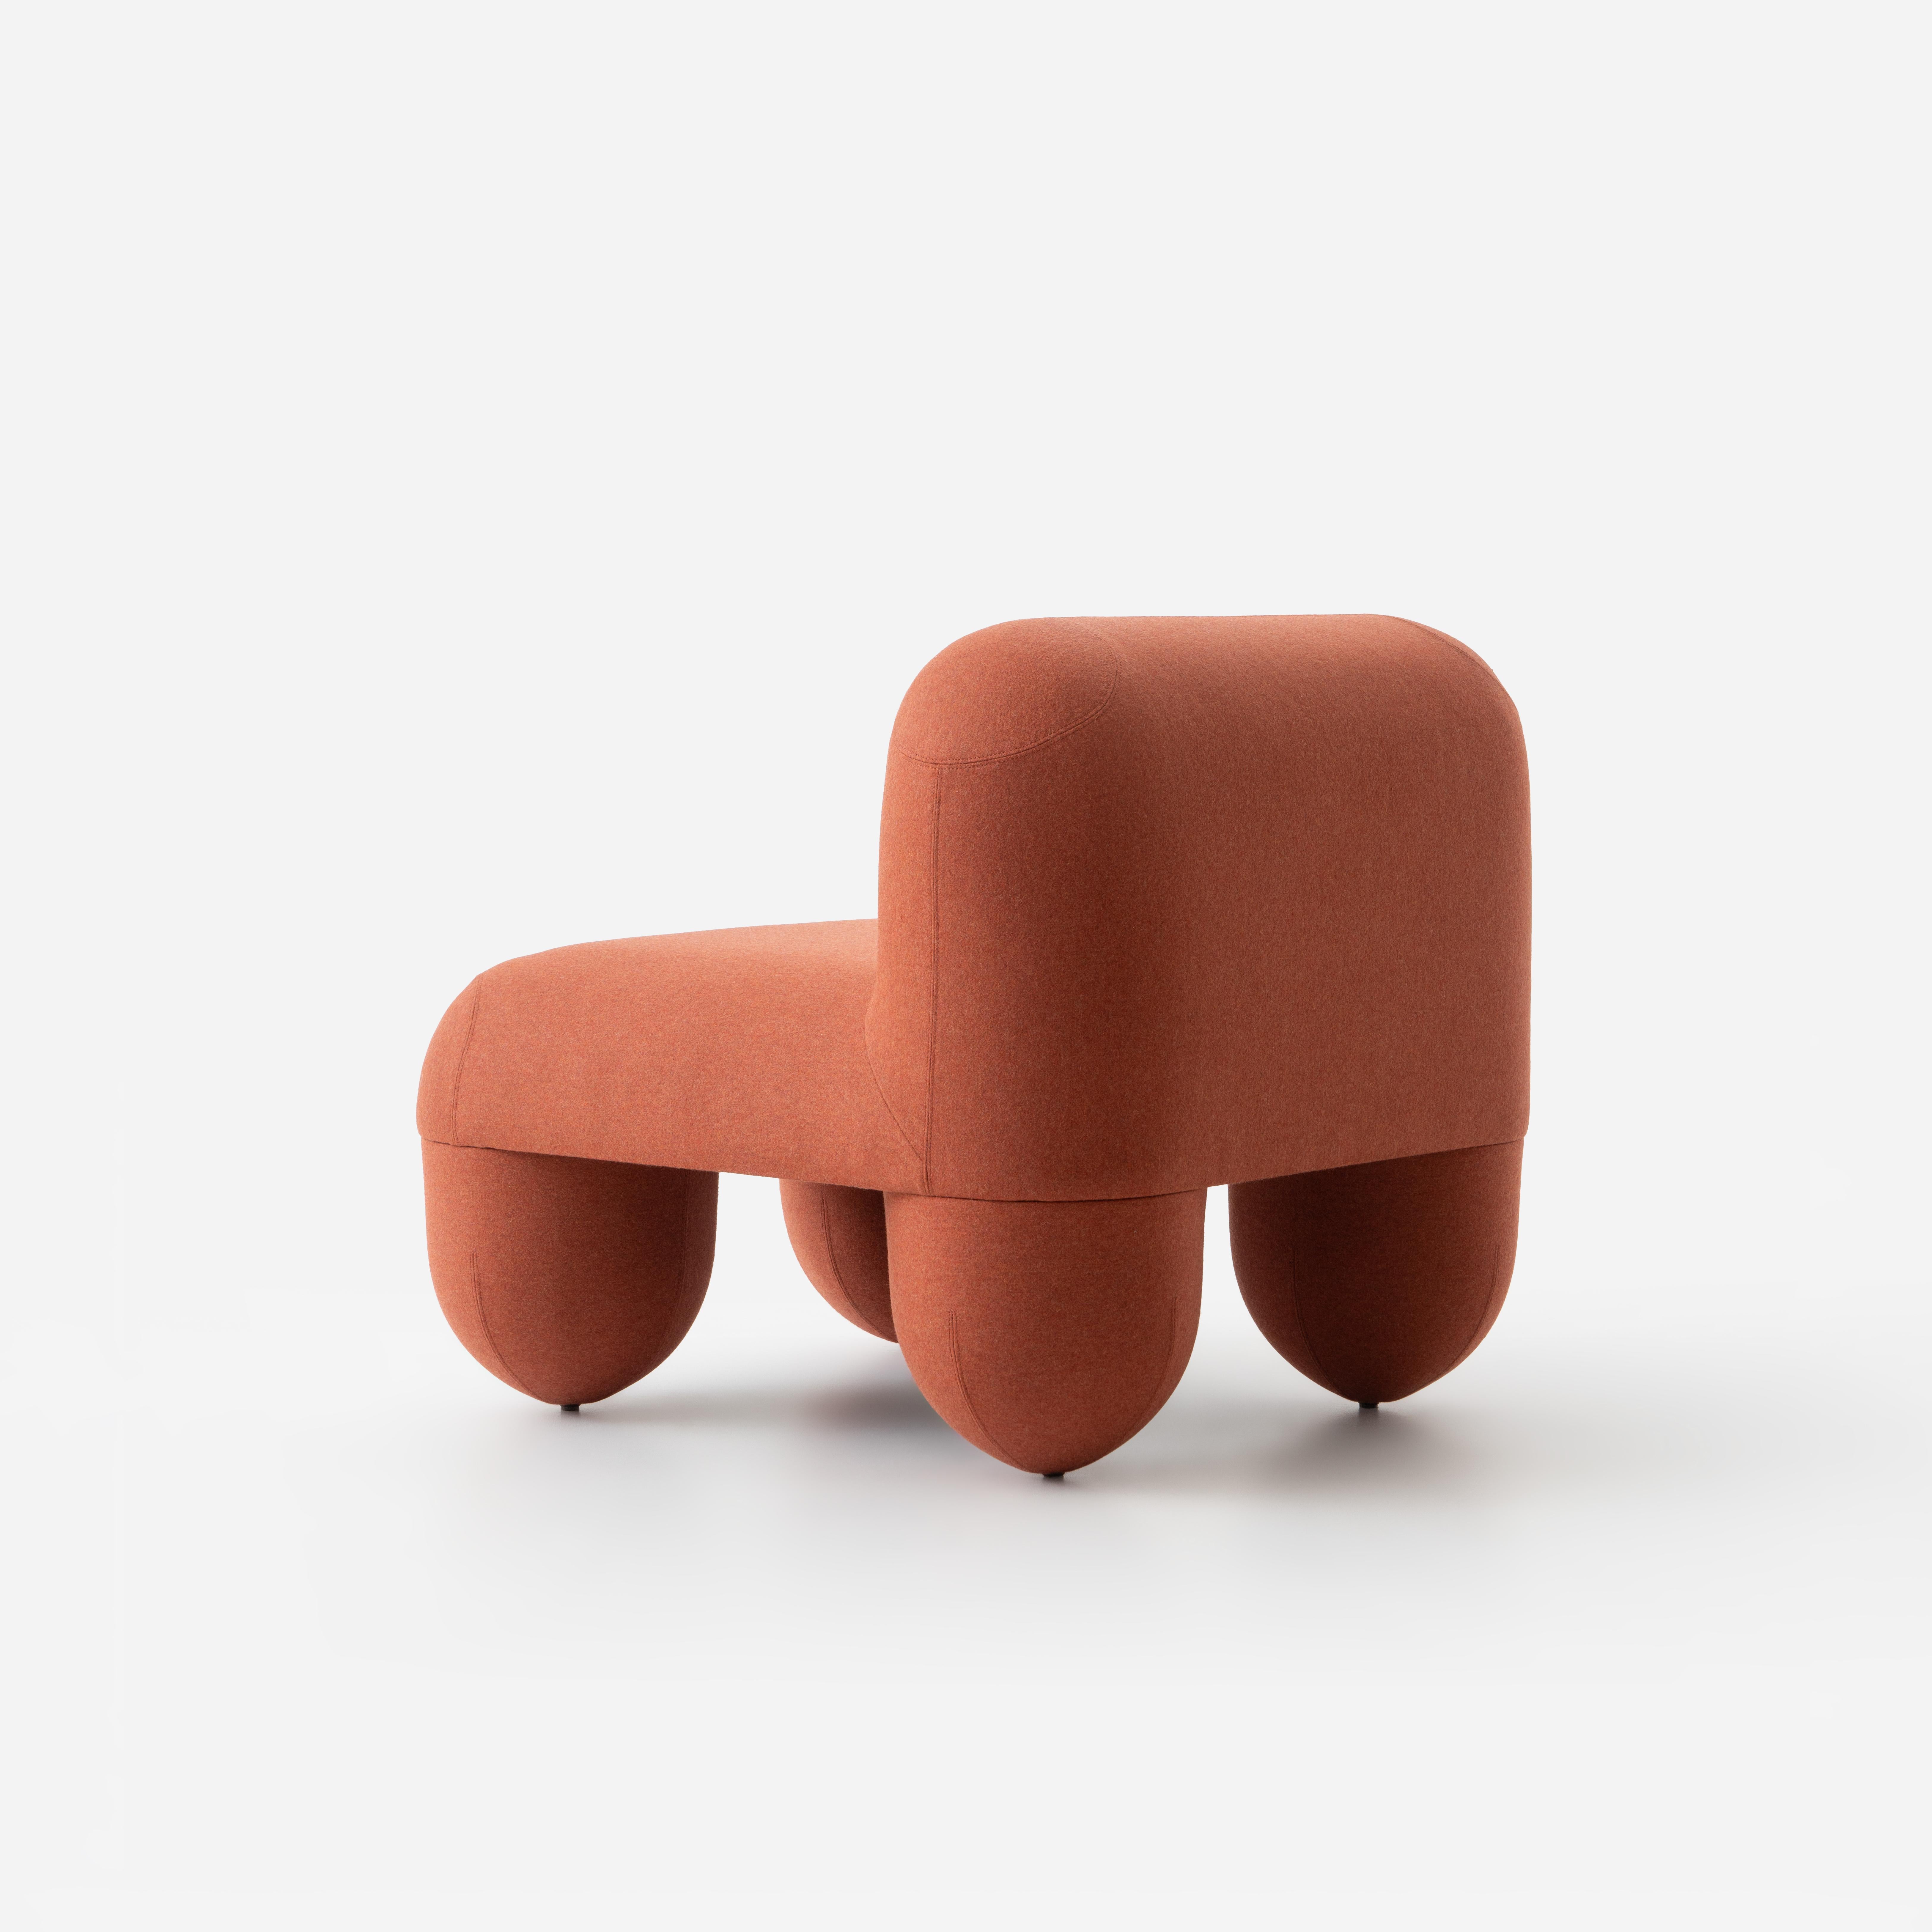 Contemporary Low Chair 'Hello' by Denys Sokolov x Noom, Orange For Sale 2